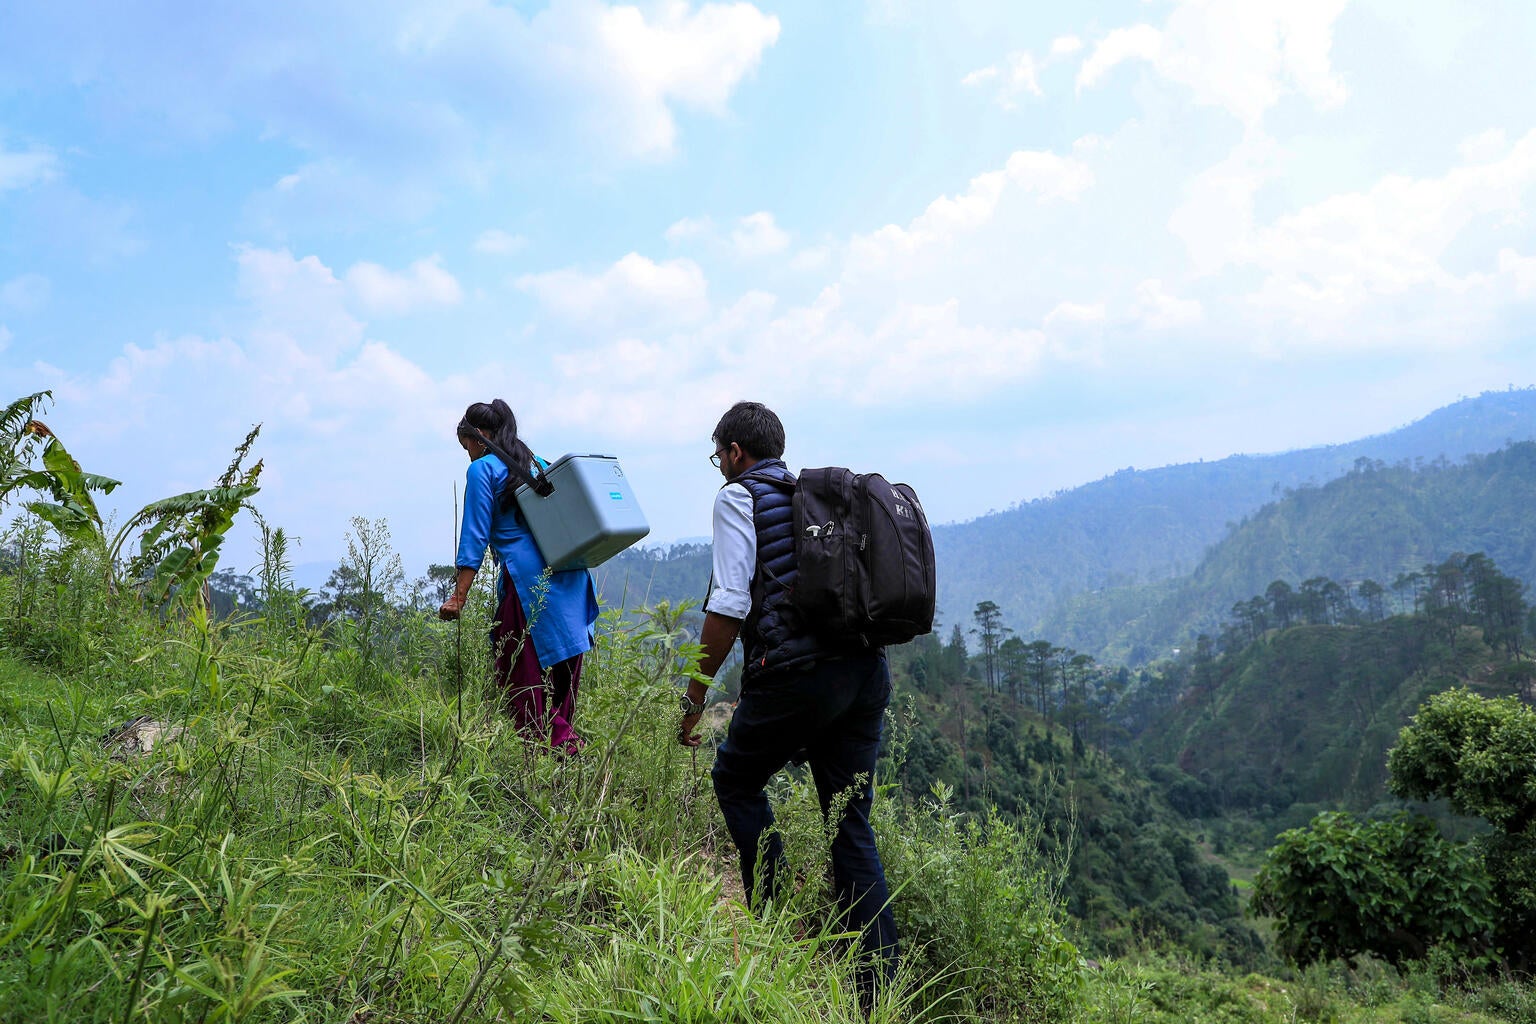 Health workers en route to a community outreach session to vaccinate children under the routine vaccination program in Nepal.